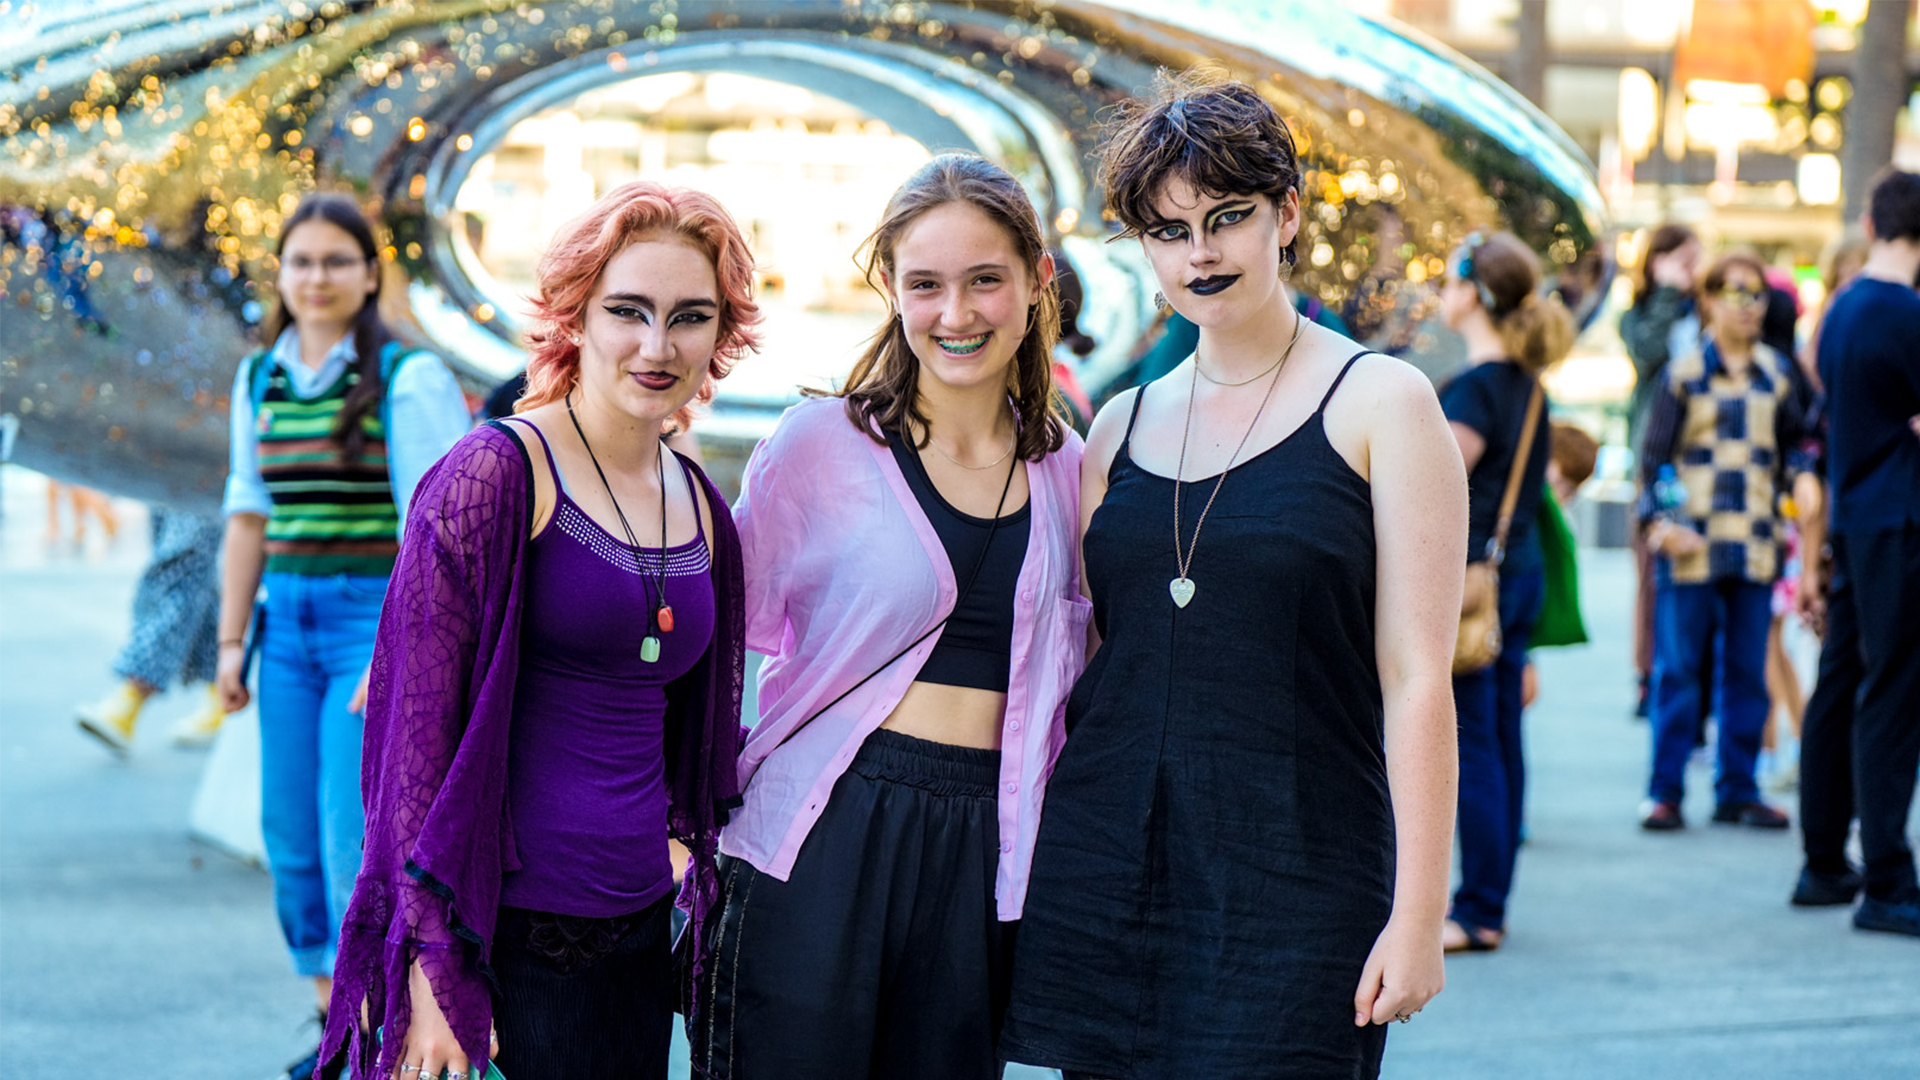 Photo of three young people with dramatic face make up on standing together and looking at the camera. There is a large metal statue in the background behind them. Photo credits to Ash Penin.